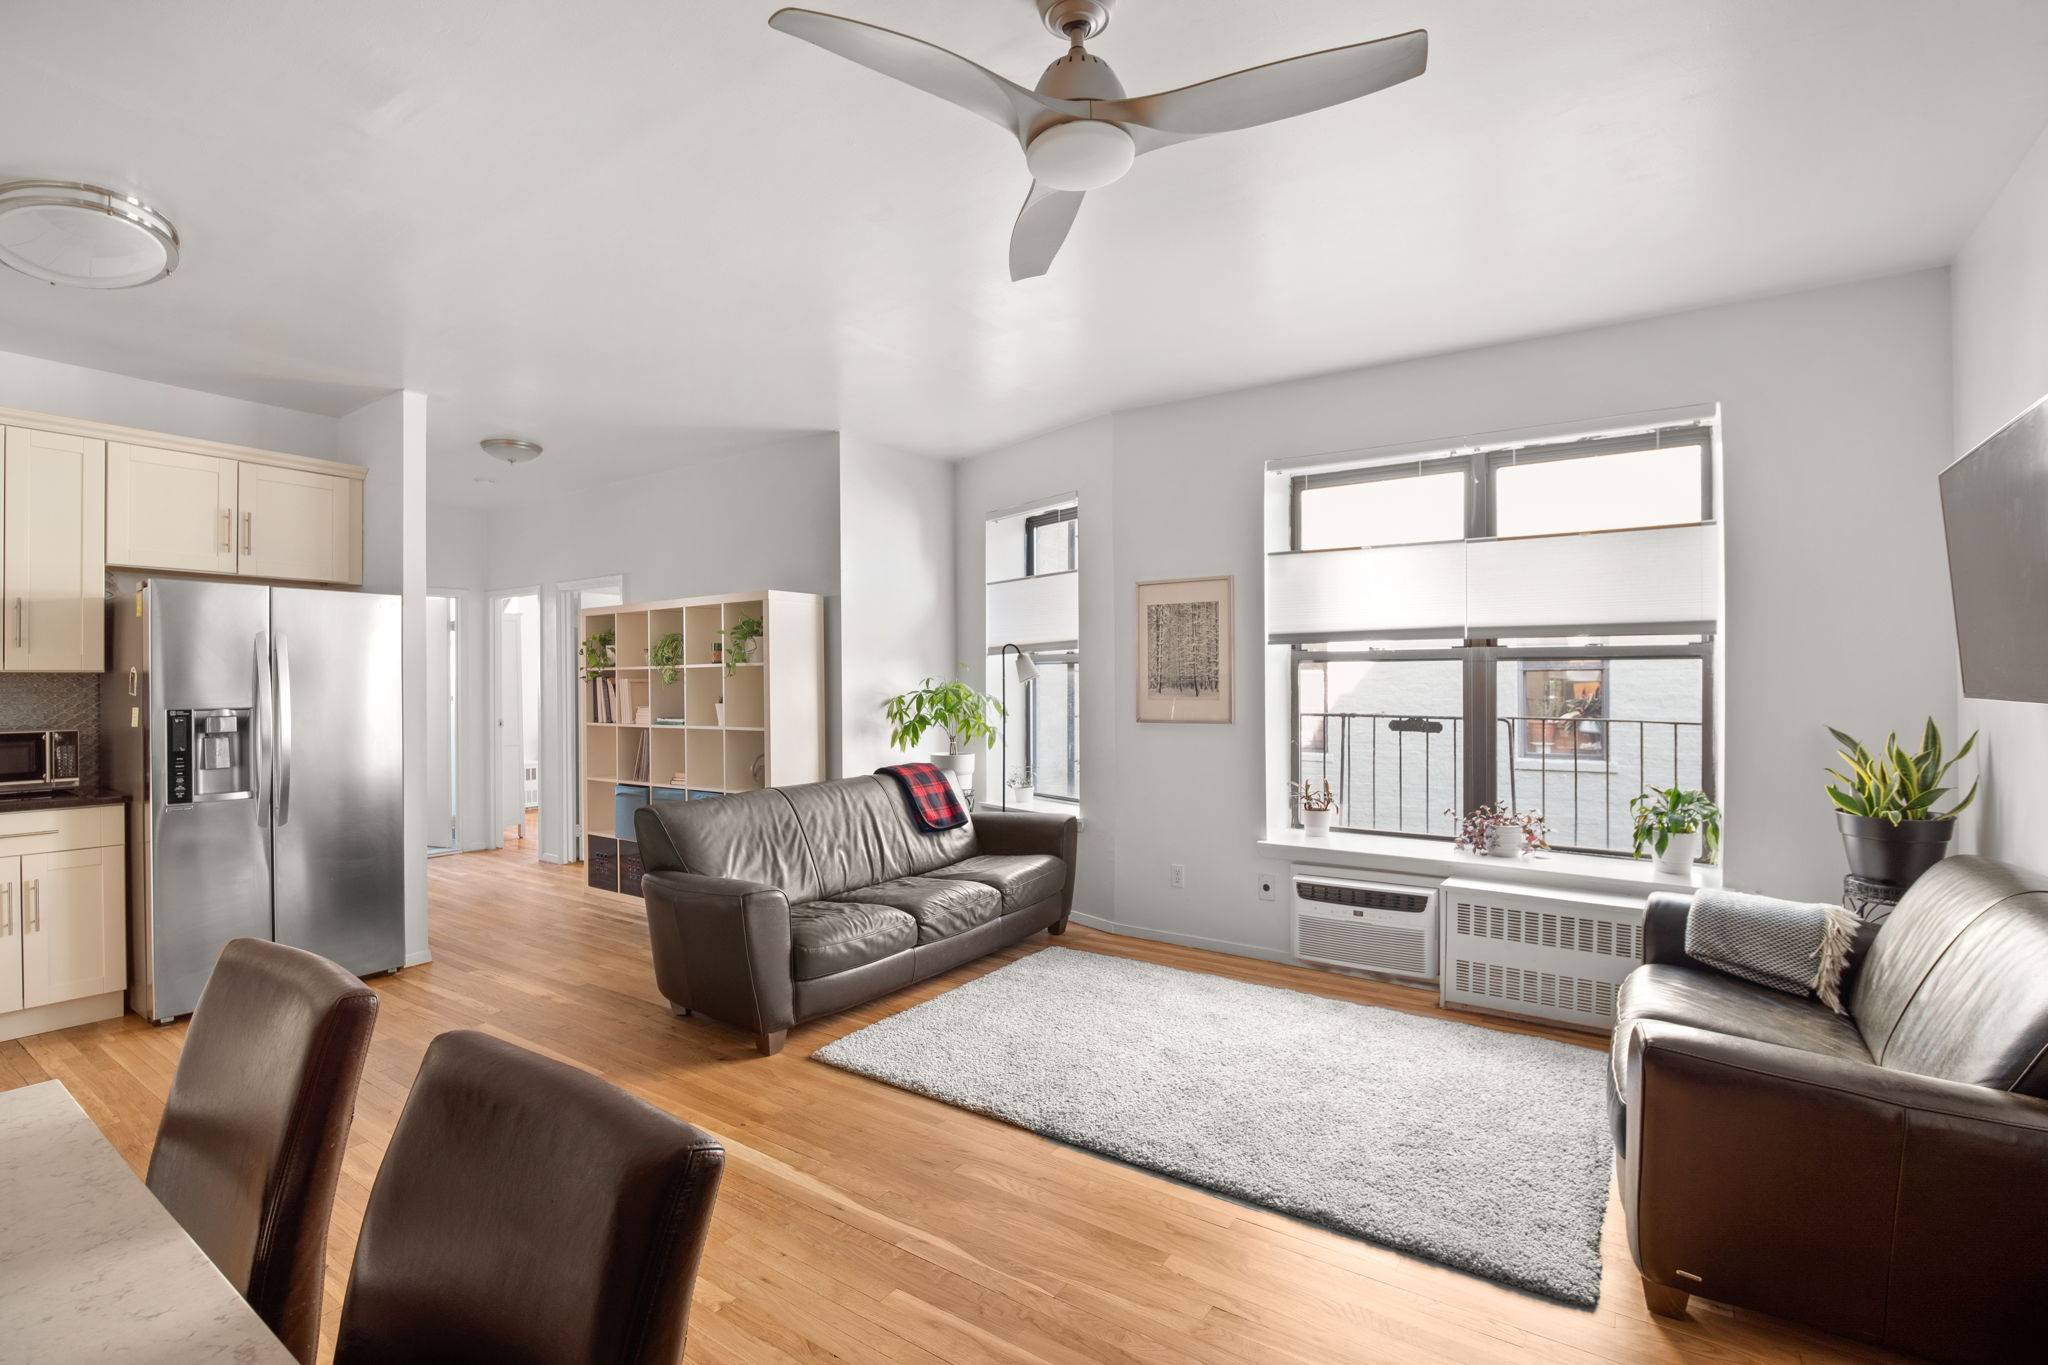 Located in the heart of Kensington, Brooklyn, this gorgeous and turnkey top floor three bedroom home checks all the boxes.